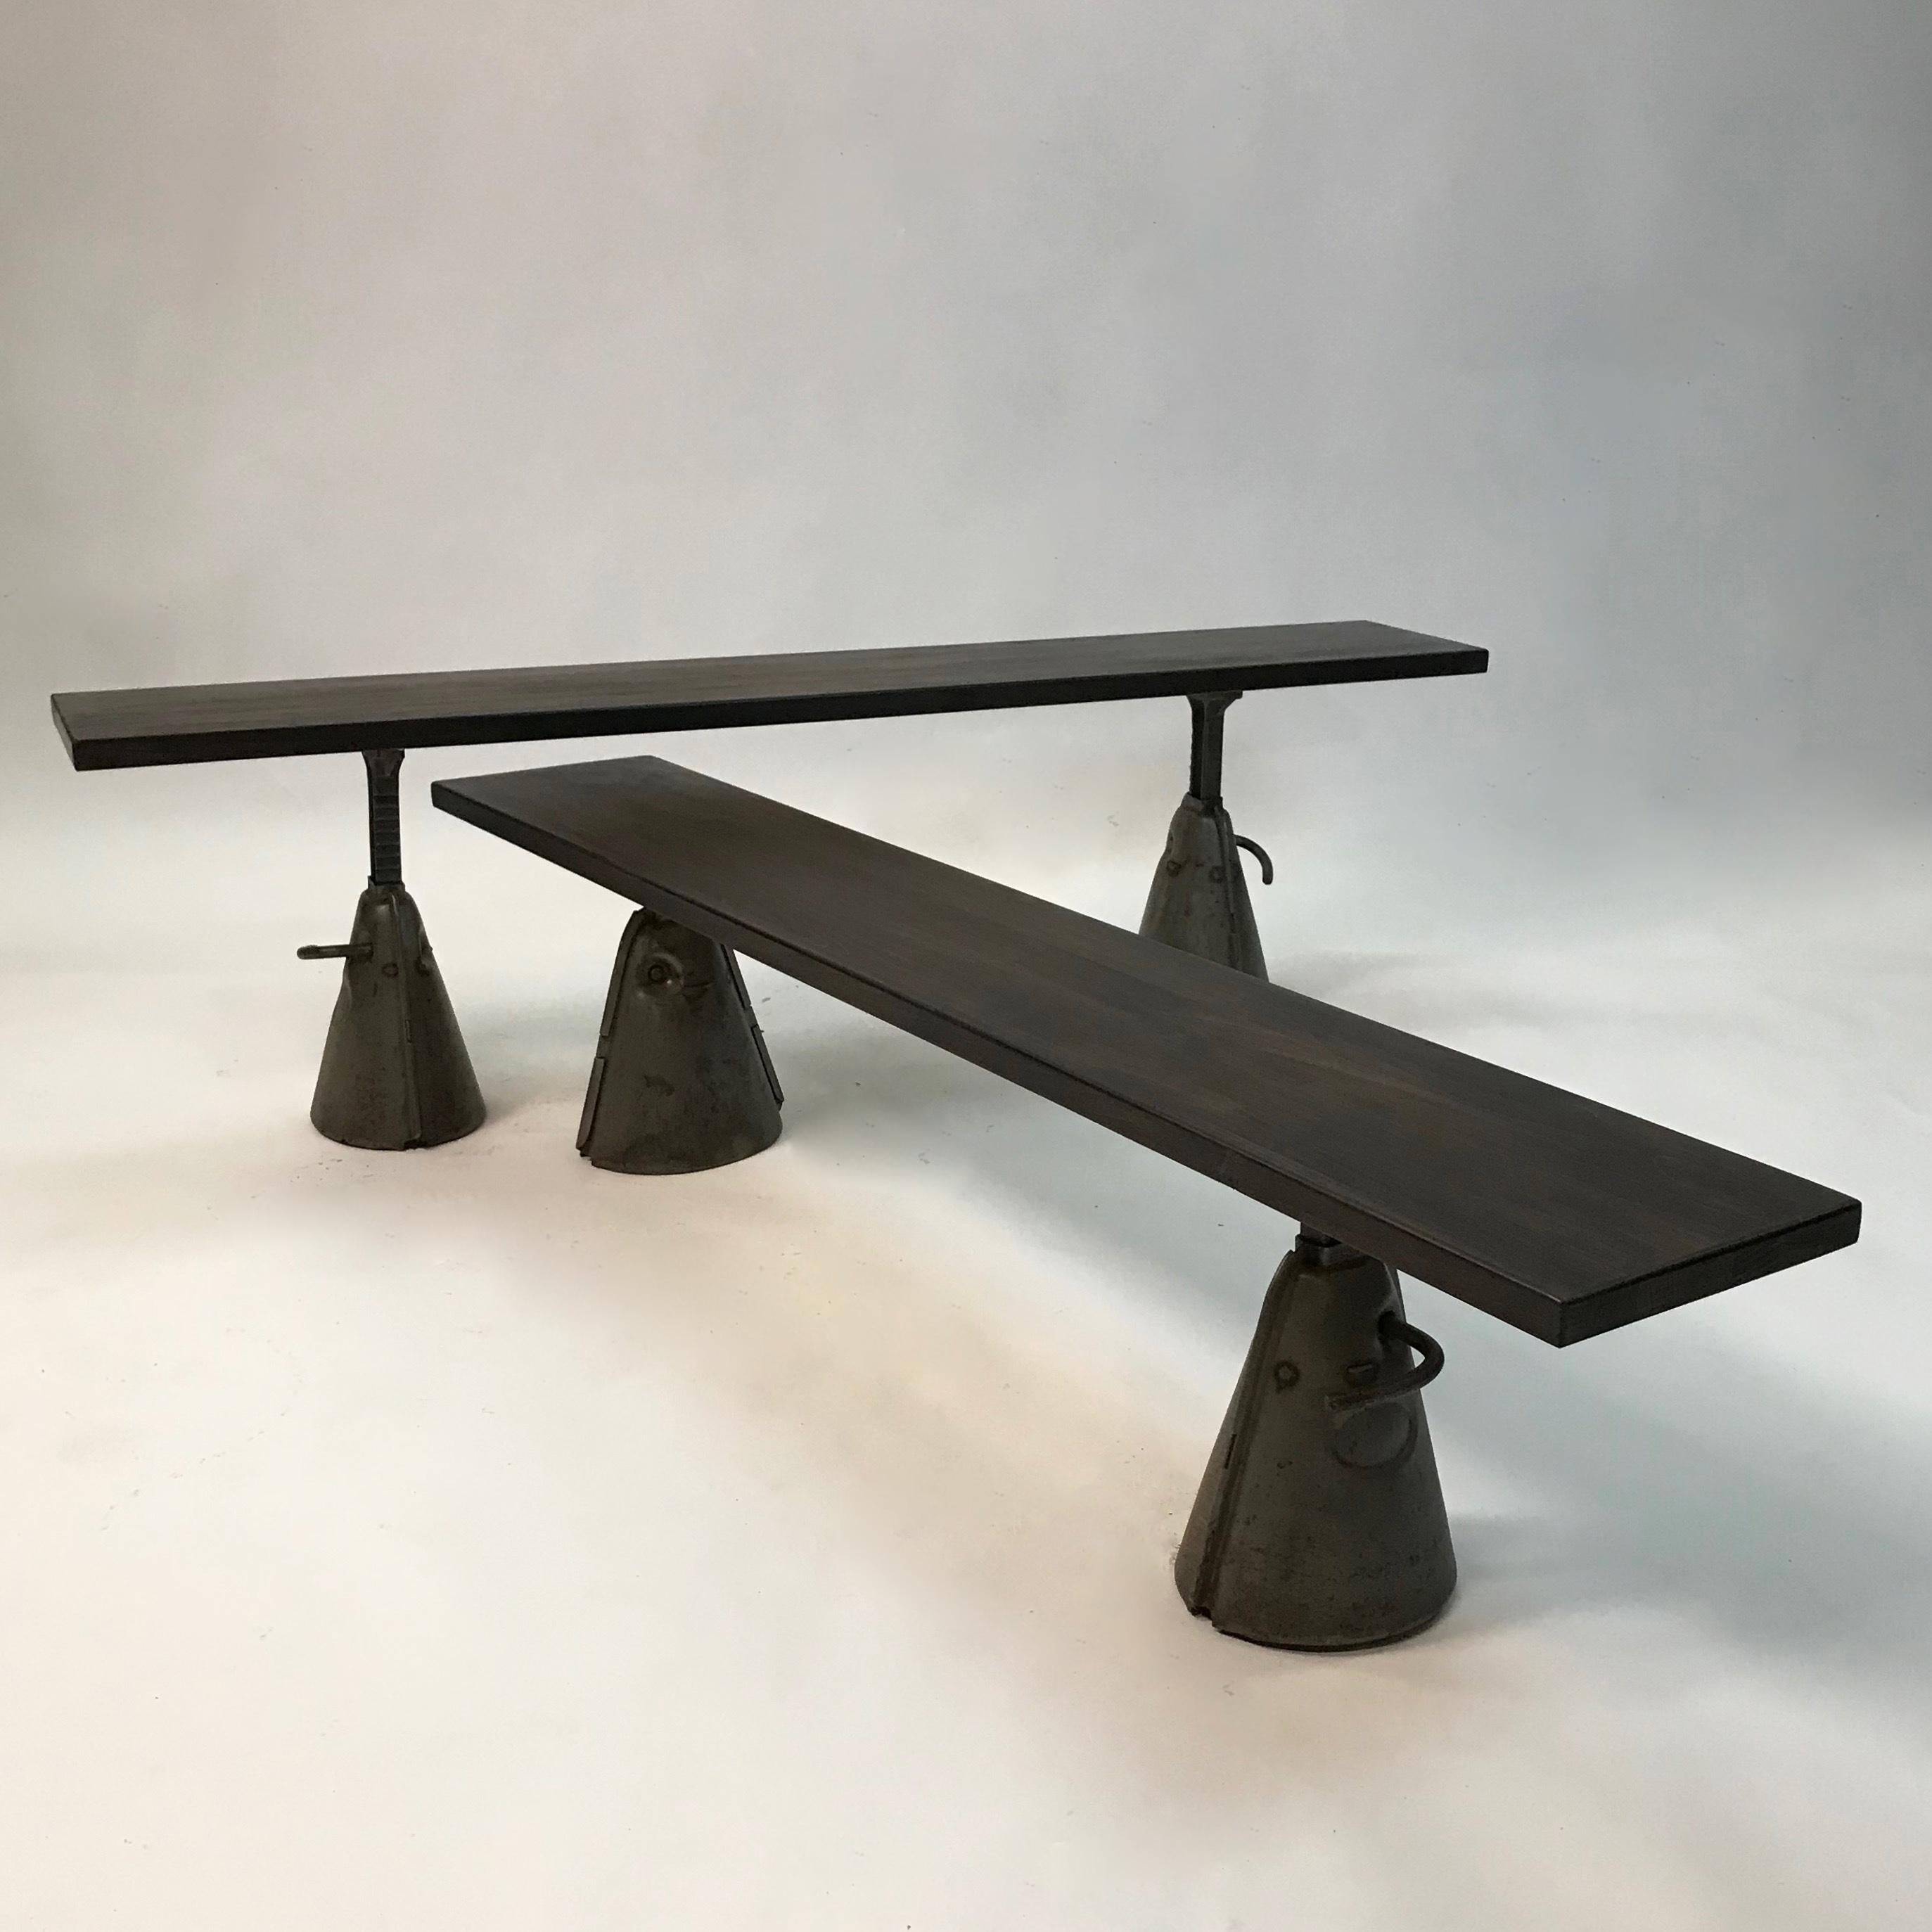 Custom, Industrial bench features an ebonized, reclaimed maple top with cast iron legs that are height adjustable from 12 - 20 inches with brushed steel feet. One bench is now available.